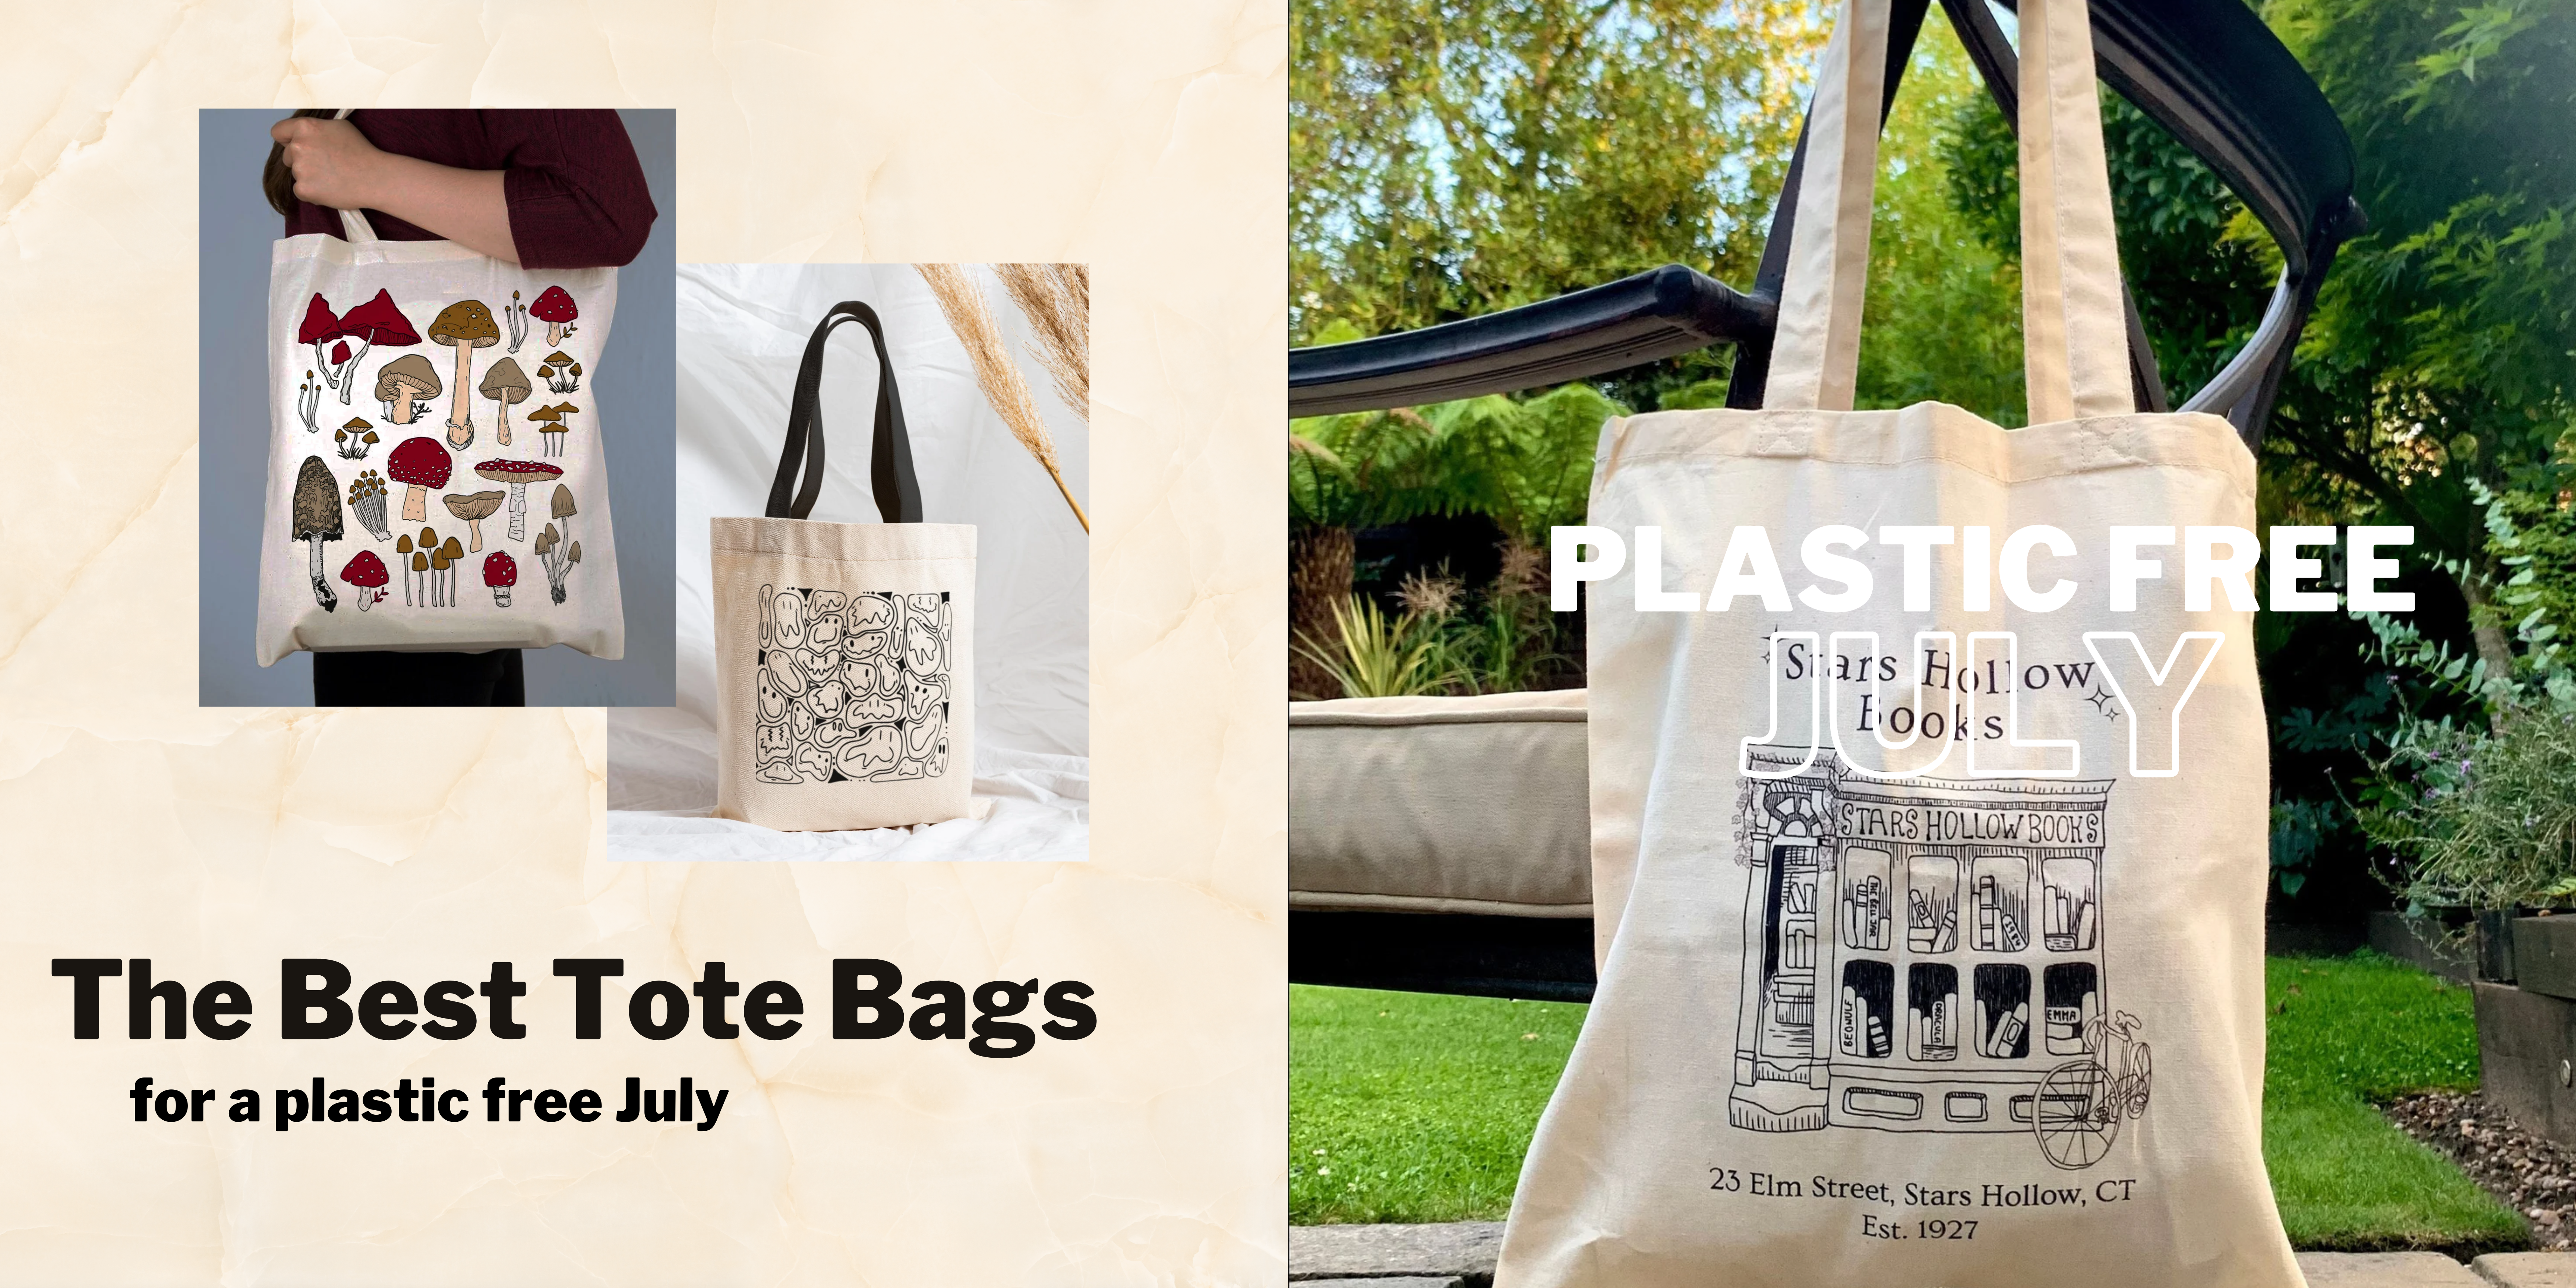 tote bag banner featuring 3 tote bags and the text 'the best tote bags for a plastic free July'